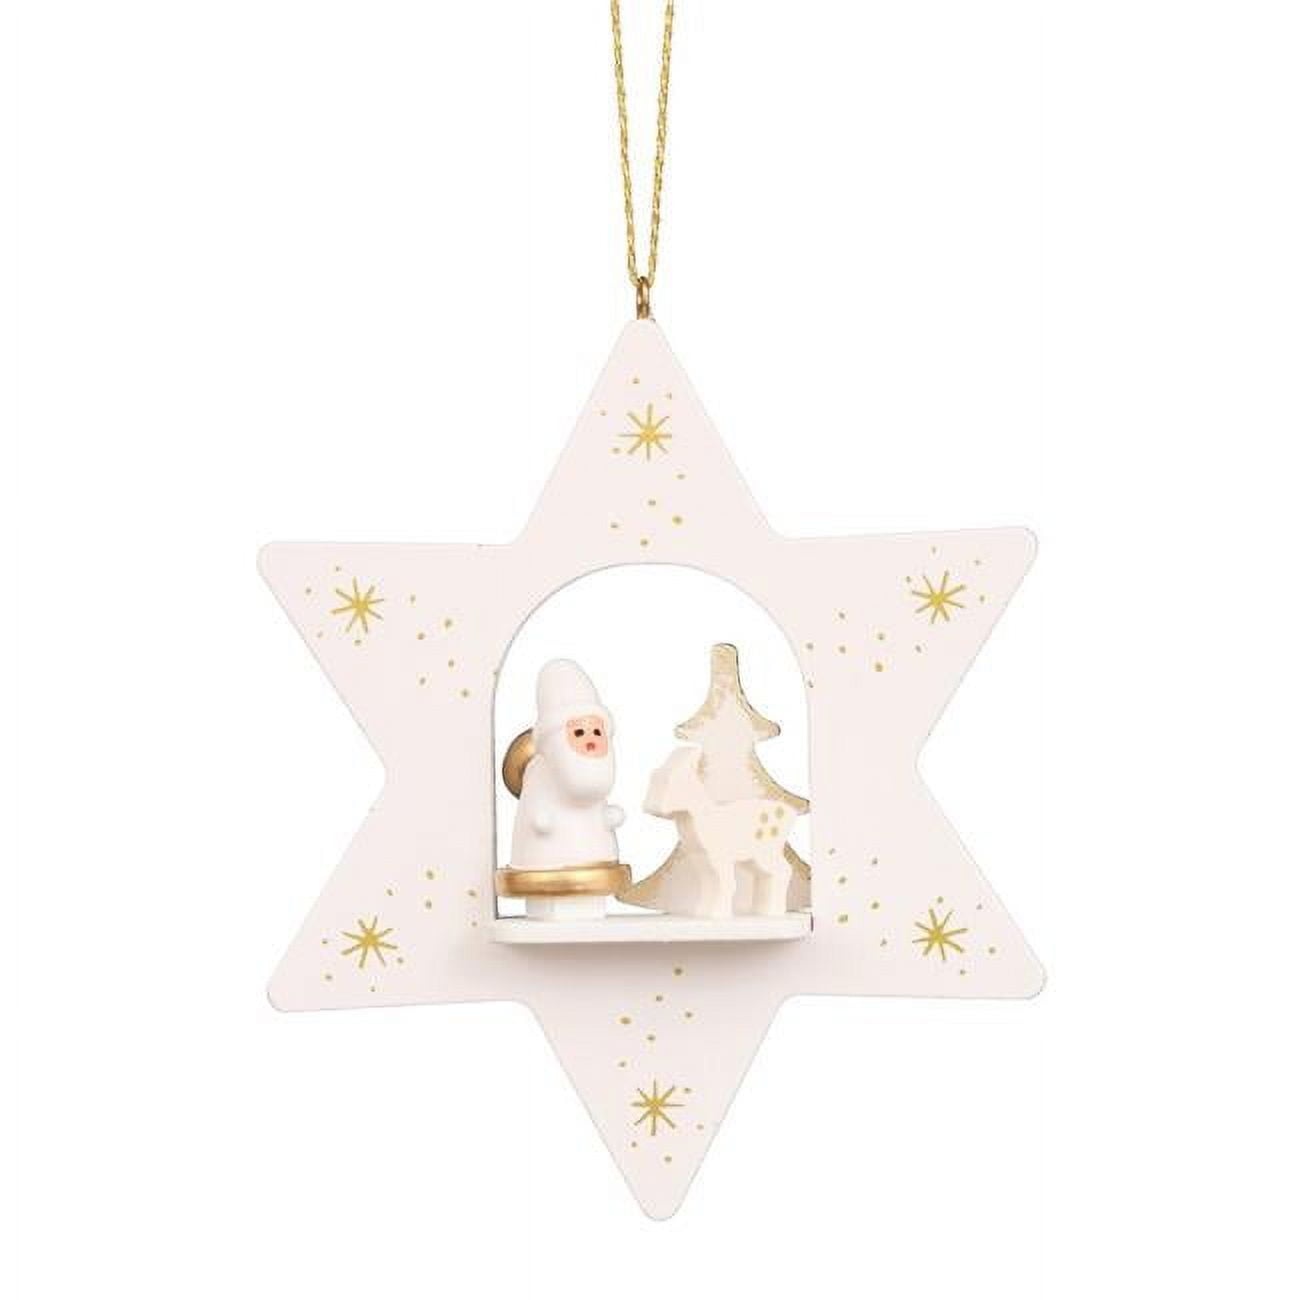 Picture of Alexander Taron 10-0666 Christian Ulbricht Ornament - White Star with Santa - 4 x 3.25 x 1 in.